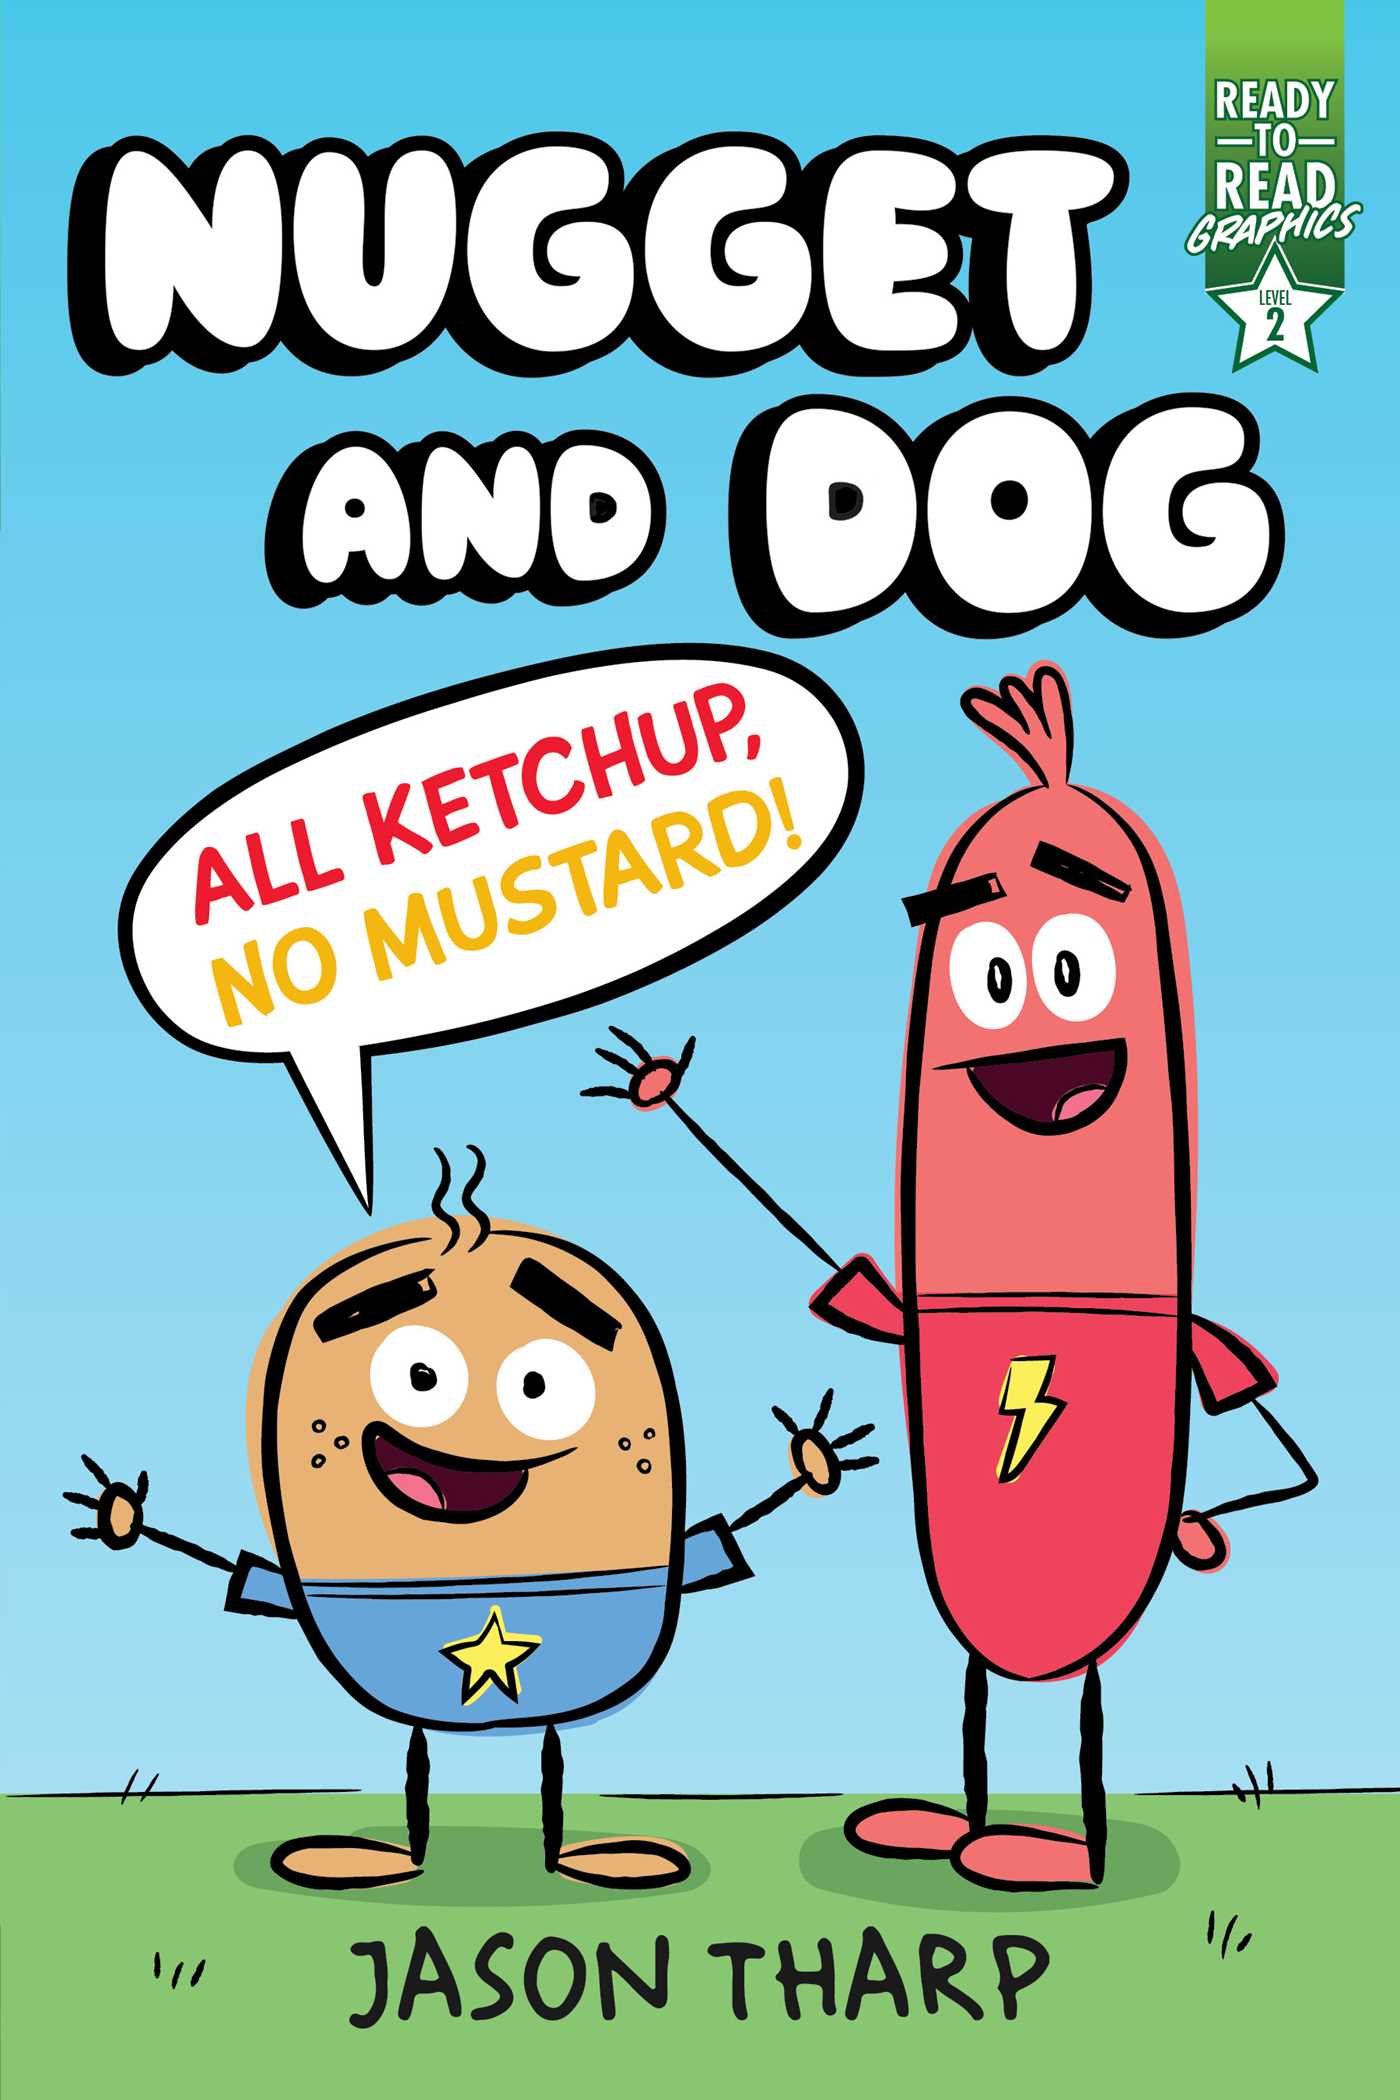 All Ketchup, No Mustard! : Ready-to-Read Graphics Level 2 | First reader